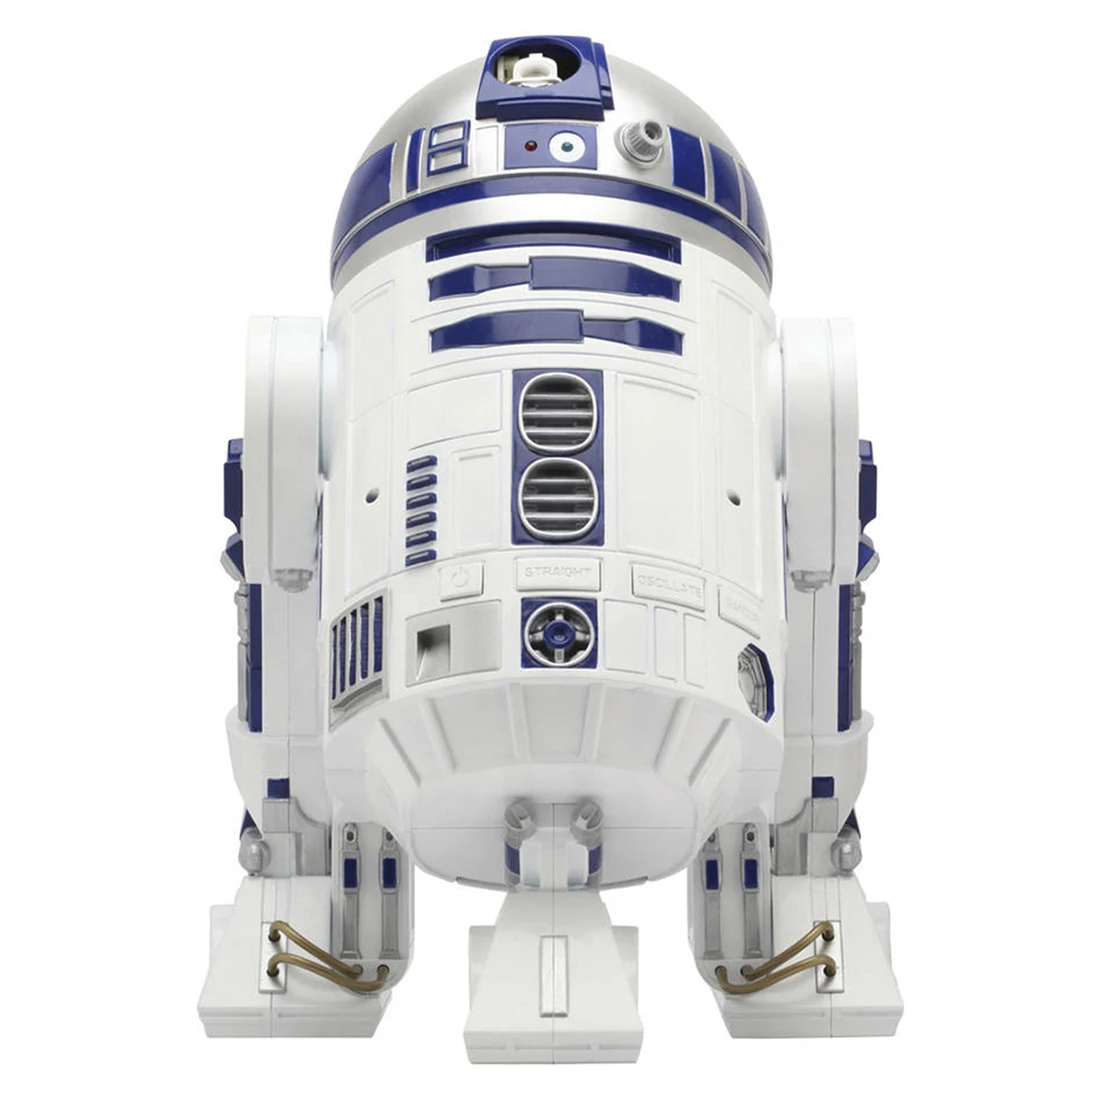 Imperial Toy R2 D2 Bubble Machine Makes Authentic Sounds Rotates 90 Degrees And Features Lights And Sounds With 8Oz. Bottiglia